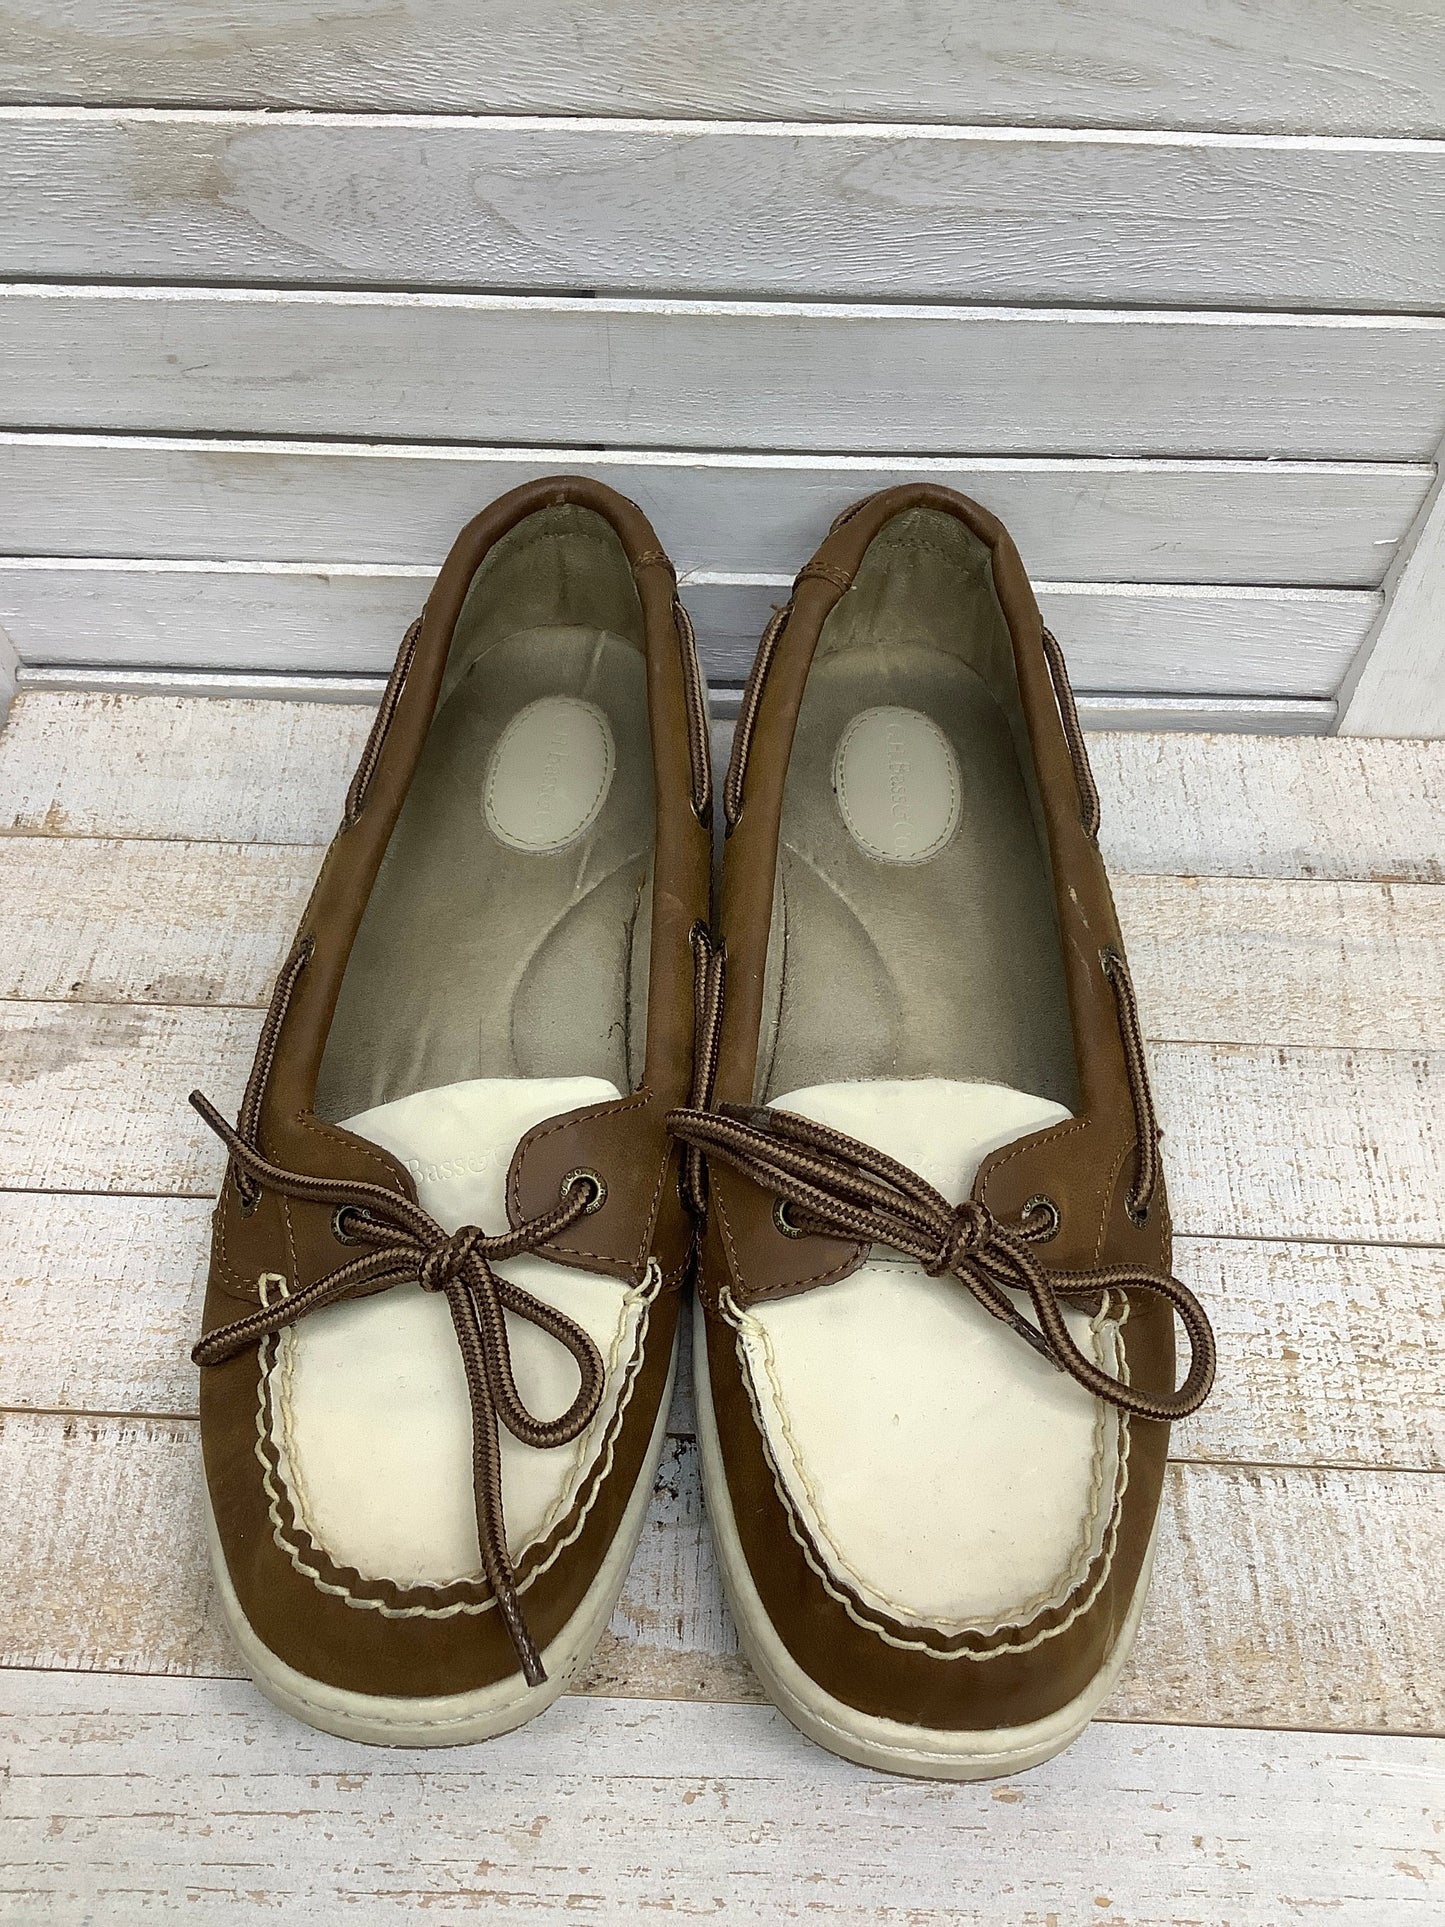 Shoes Flats Boat By Gh Bass And Co  Size: 9.5